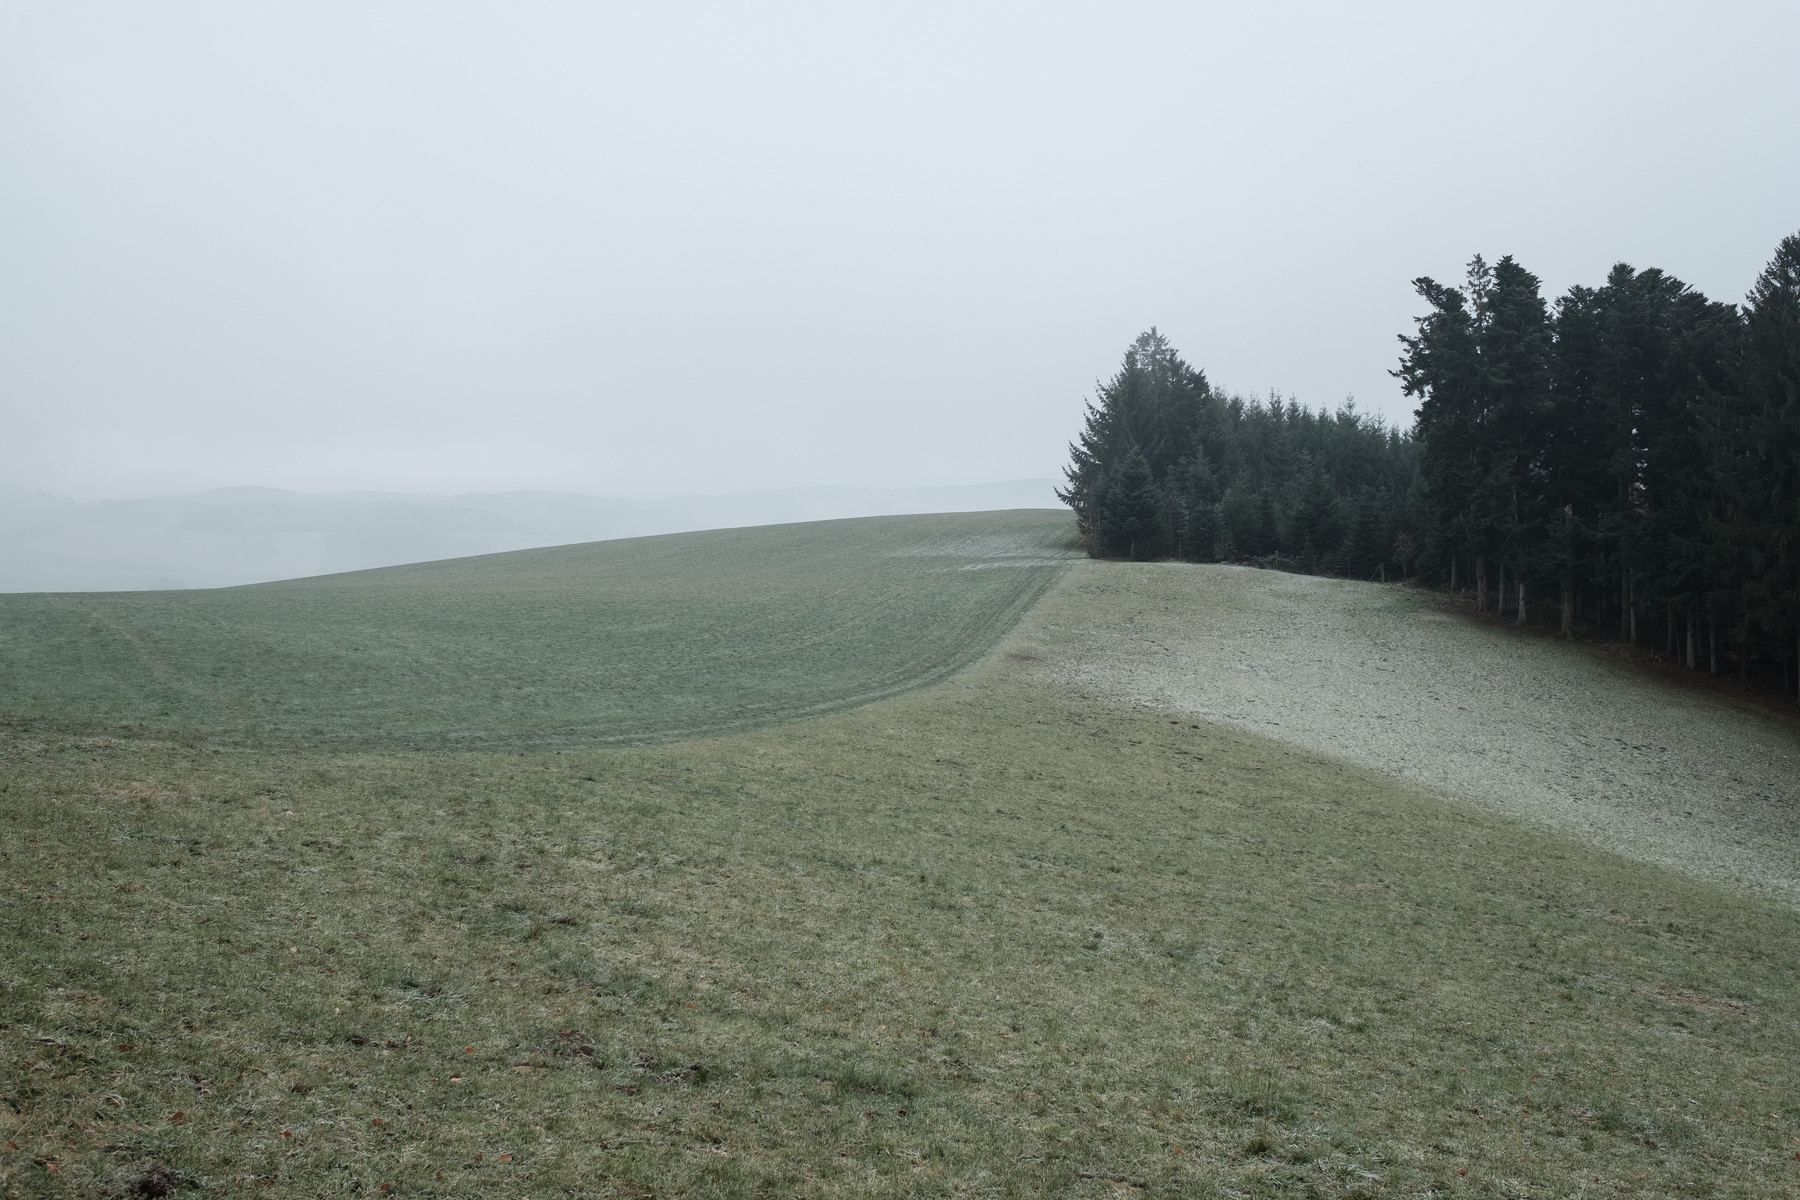 Foreground: Flowing grassy hilltop covered in frost and some snow. Closed off on the right hand side in the near distance by trees. Background: Foggy skies and barely visible hills.